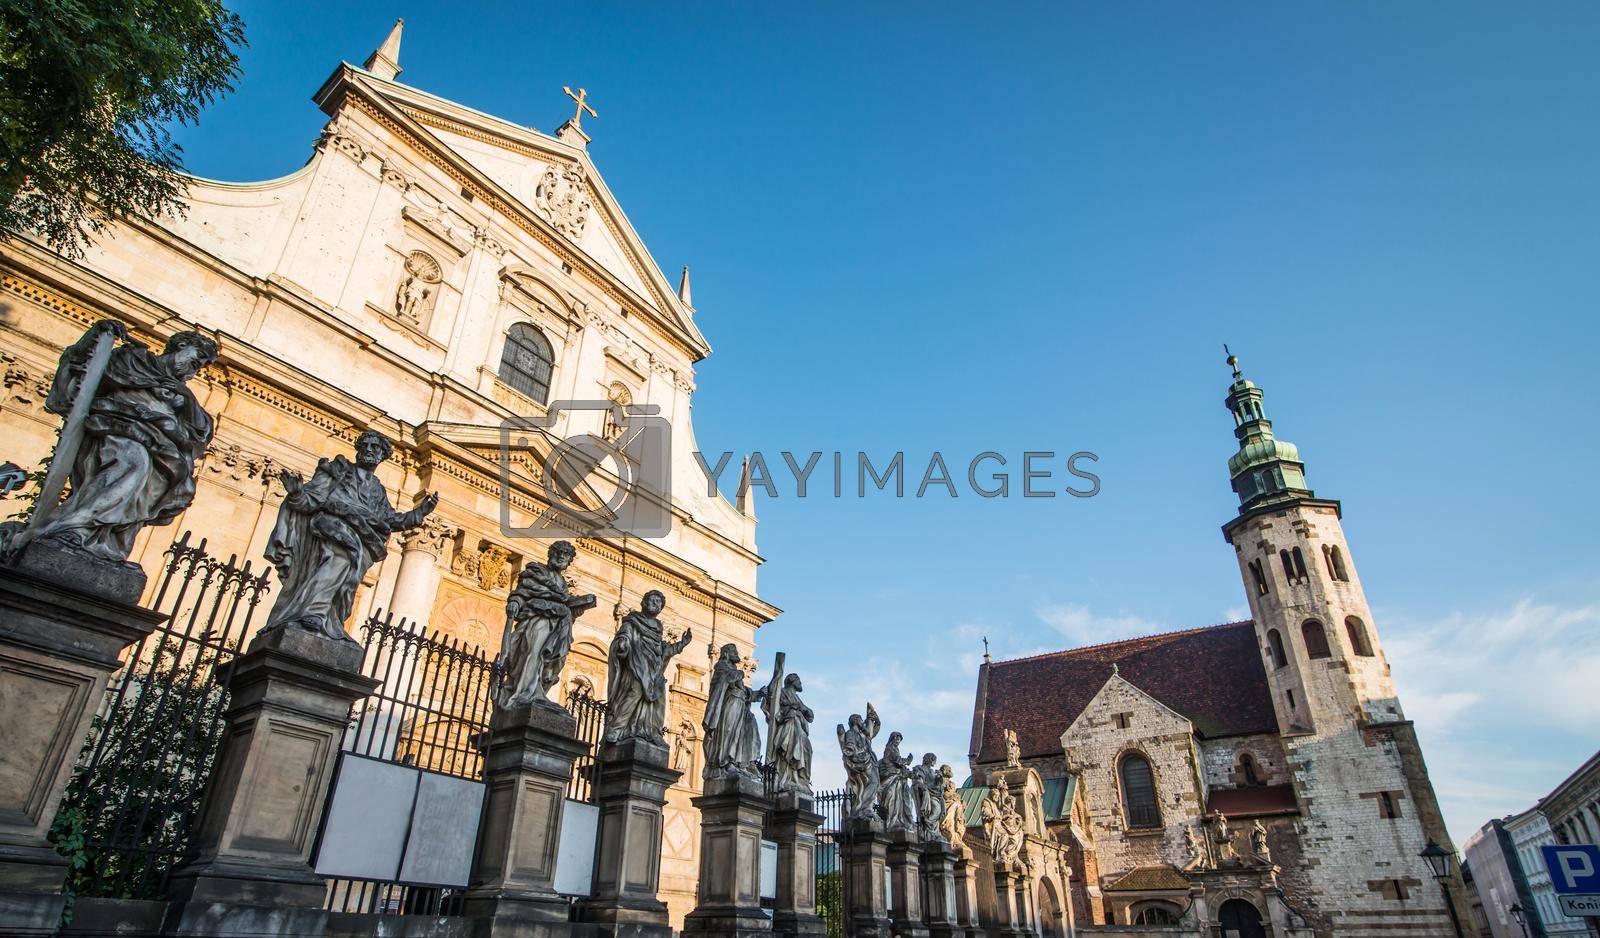 KRAKOW, POLAND - AUGUST 24: The early Baroque Church of St. Peter and St. Paul and the statues of the twelve apostles on Grodzka in the city of Krakow in Poland on 24 august 2013. Dates from 1596.